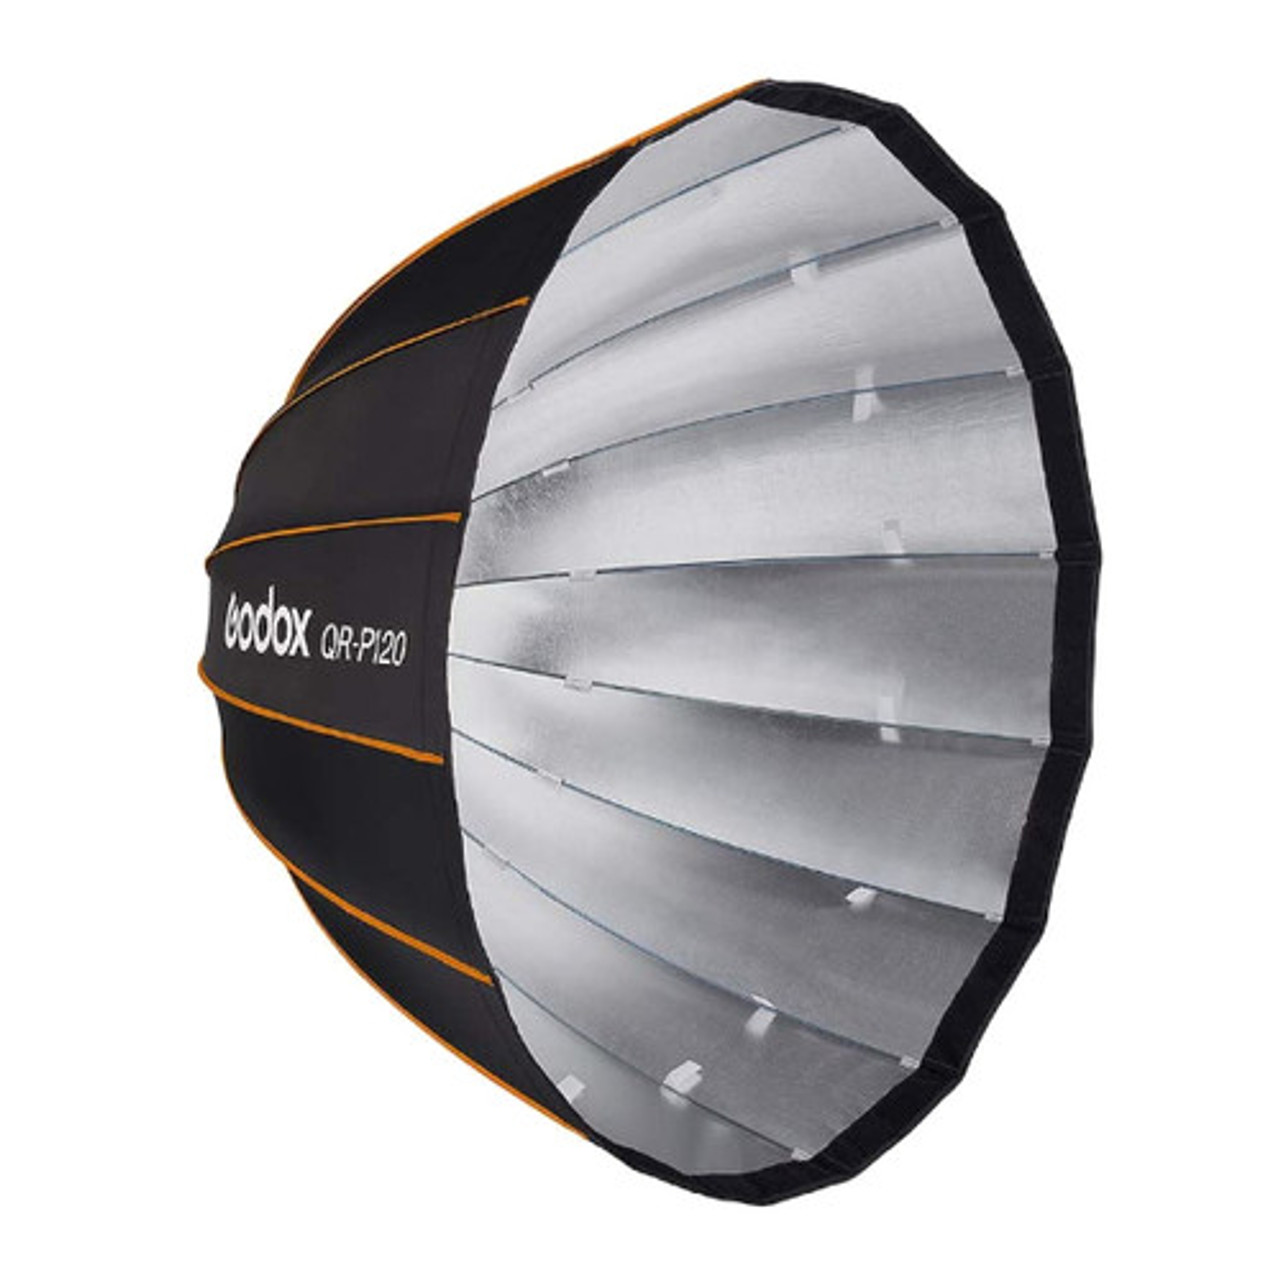 Godox Quick Release Parabolic Softbox P120 with Grid